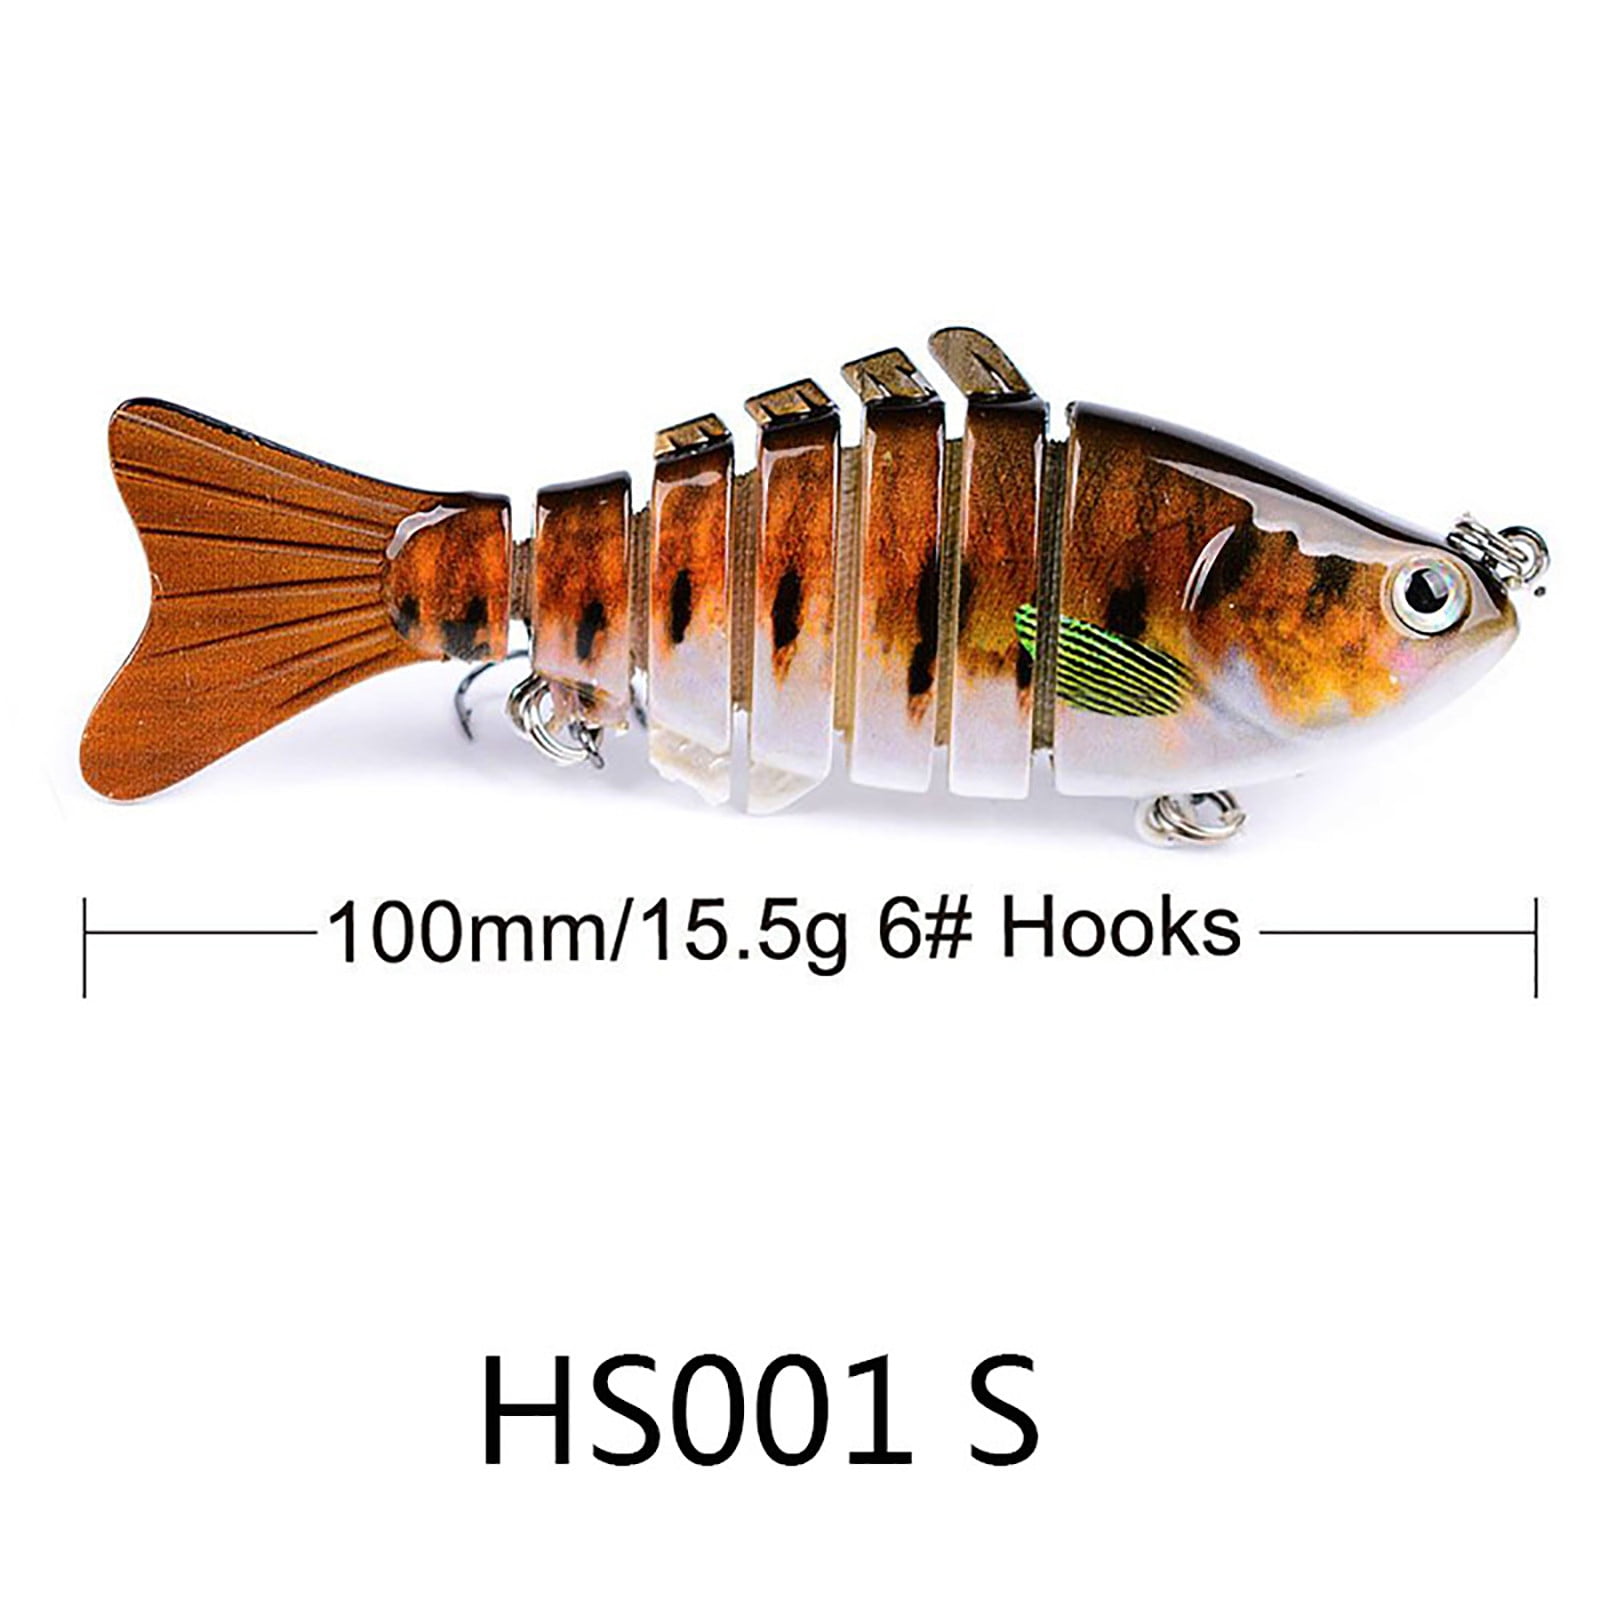 Ycolew Fishing Lures, Jointed Swimbaits for Bass Fishing